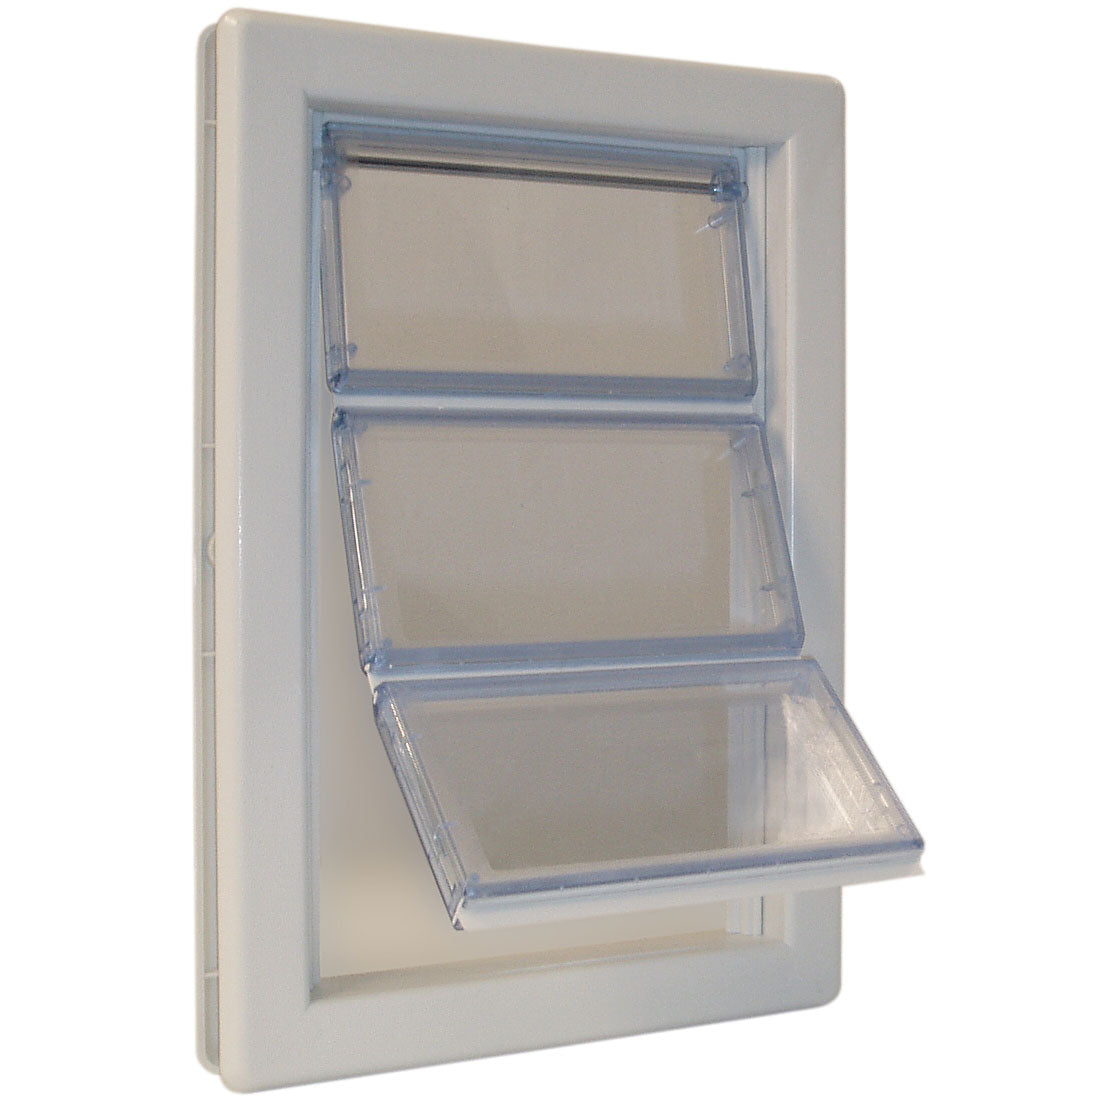 Ideal Pet Products Air-Seal Pet Door Extra Large White 2.25" x 13.75" x 18.62"